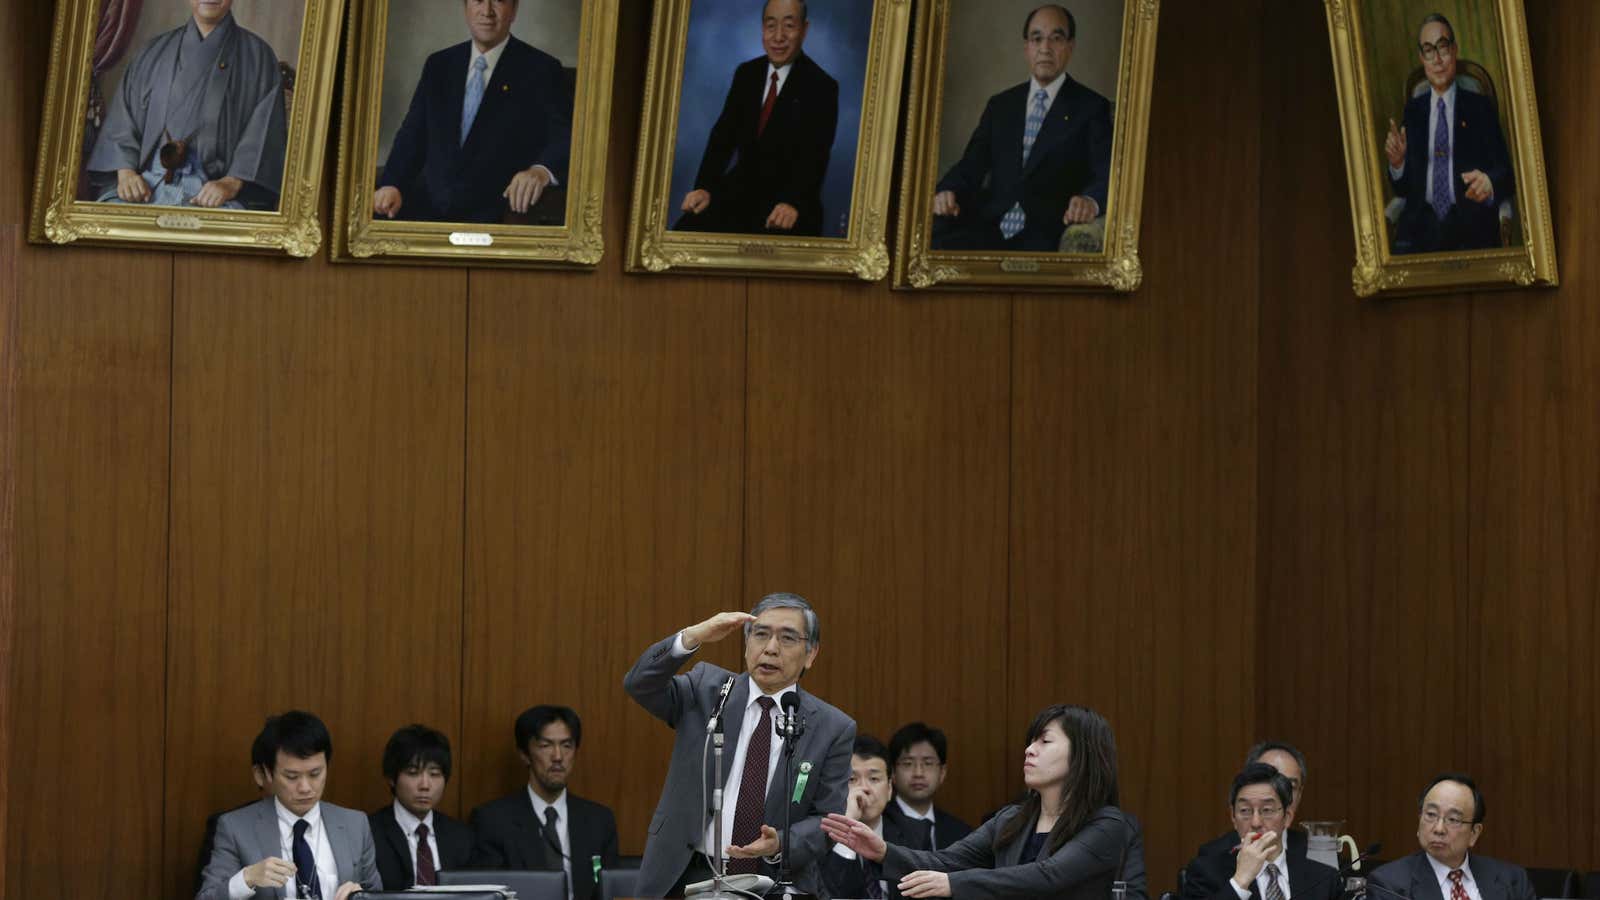 The glass ceiling for Japanese women is about this high.